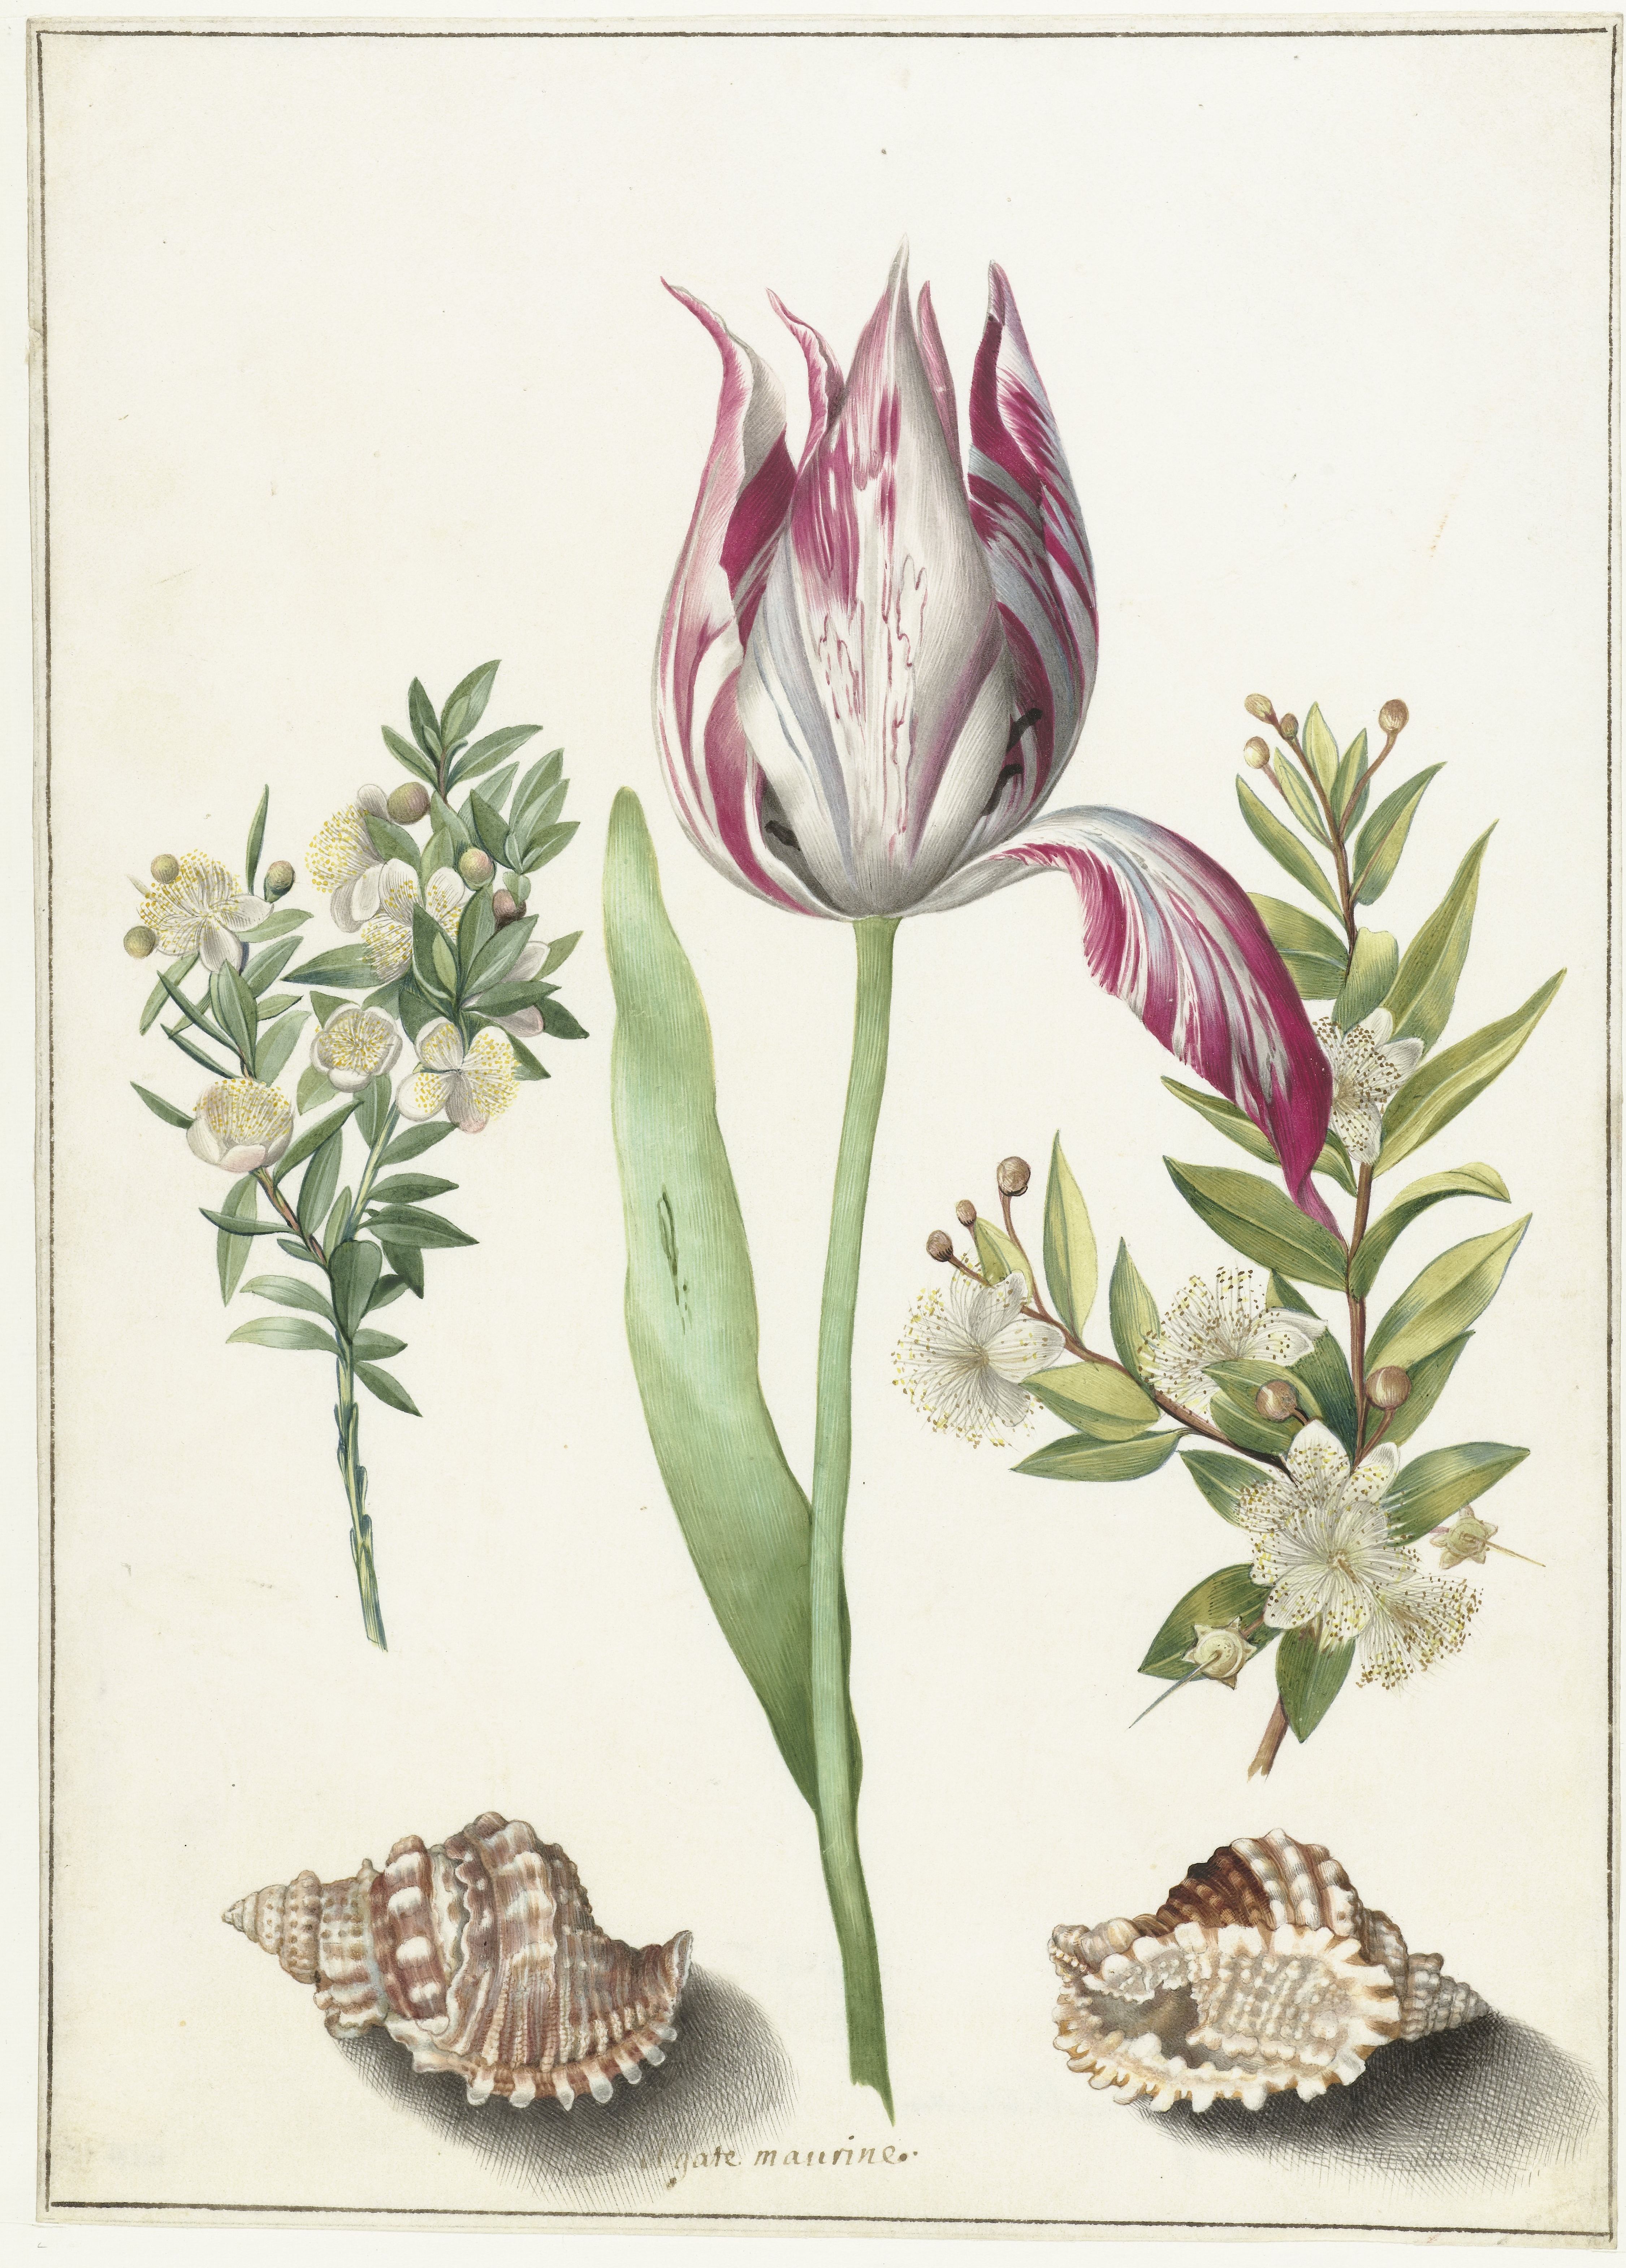 Tulip, two Branches of Myrtle and two Shells, Maria Sibylla Merian (attributed to) c. 1700. Rijksmuseum